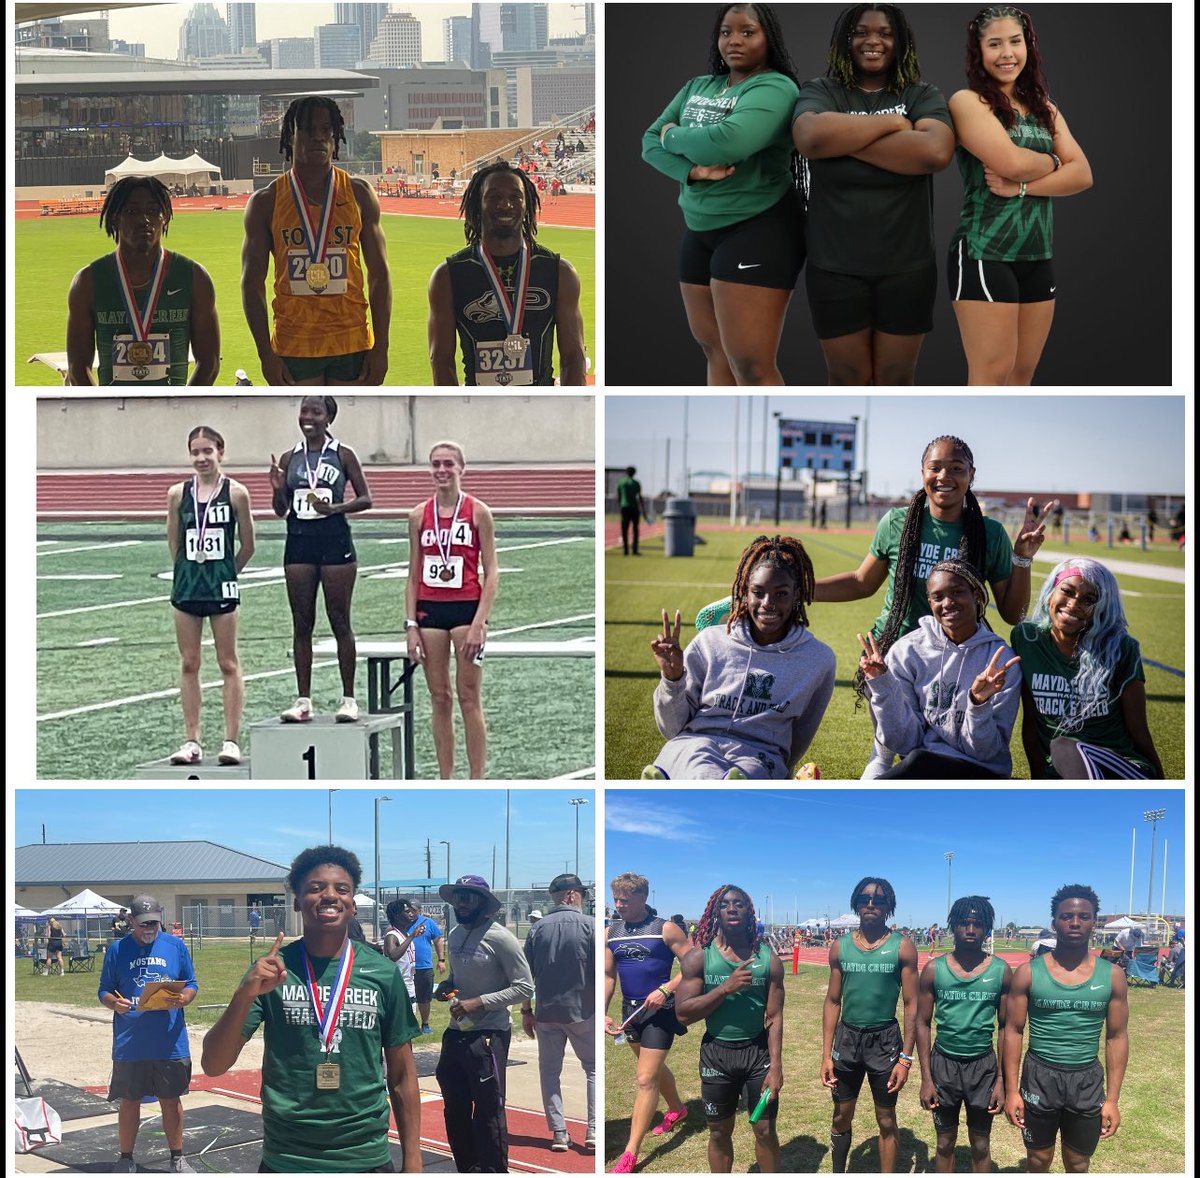 Great season Mayde Creek Track and Field Athletes. Your performance this season has been nothing short of exceptional, and it's evident that your passion for the sport shines through in every race, jump, or throw. Next year is going to be a movie!!!